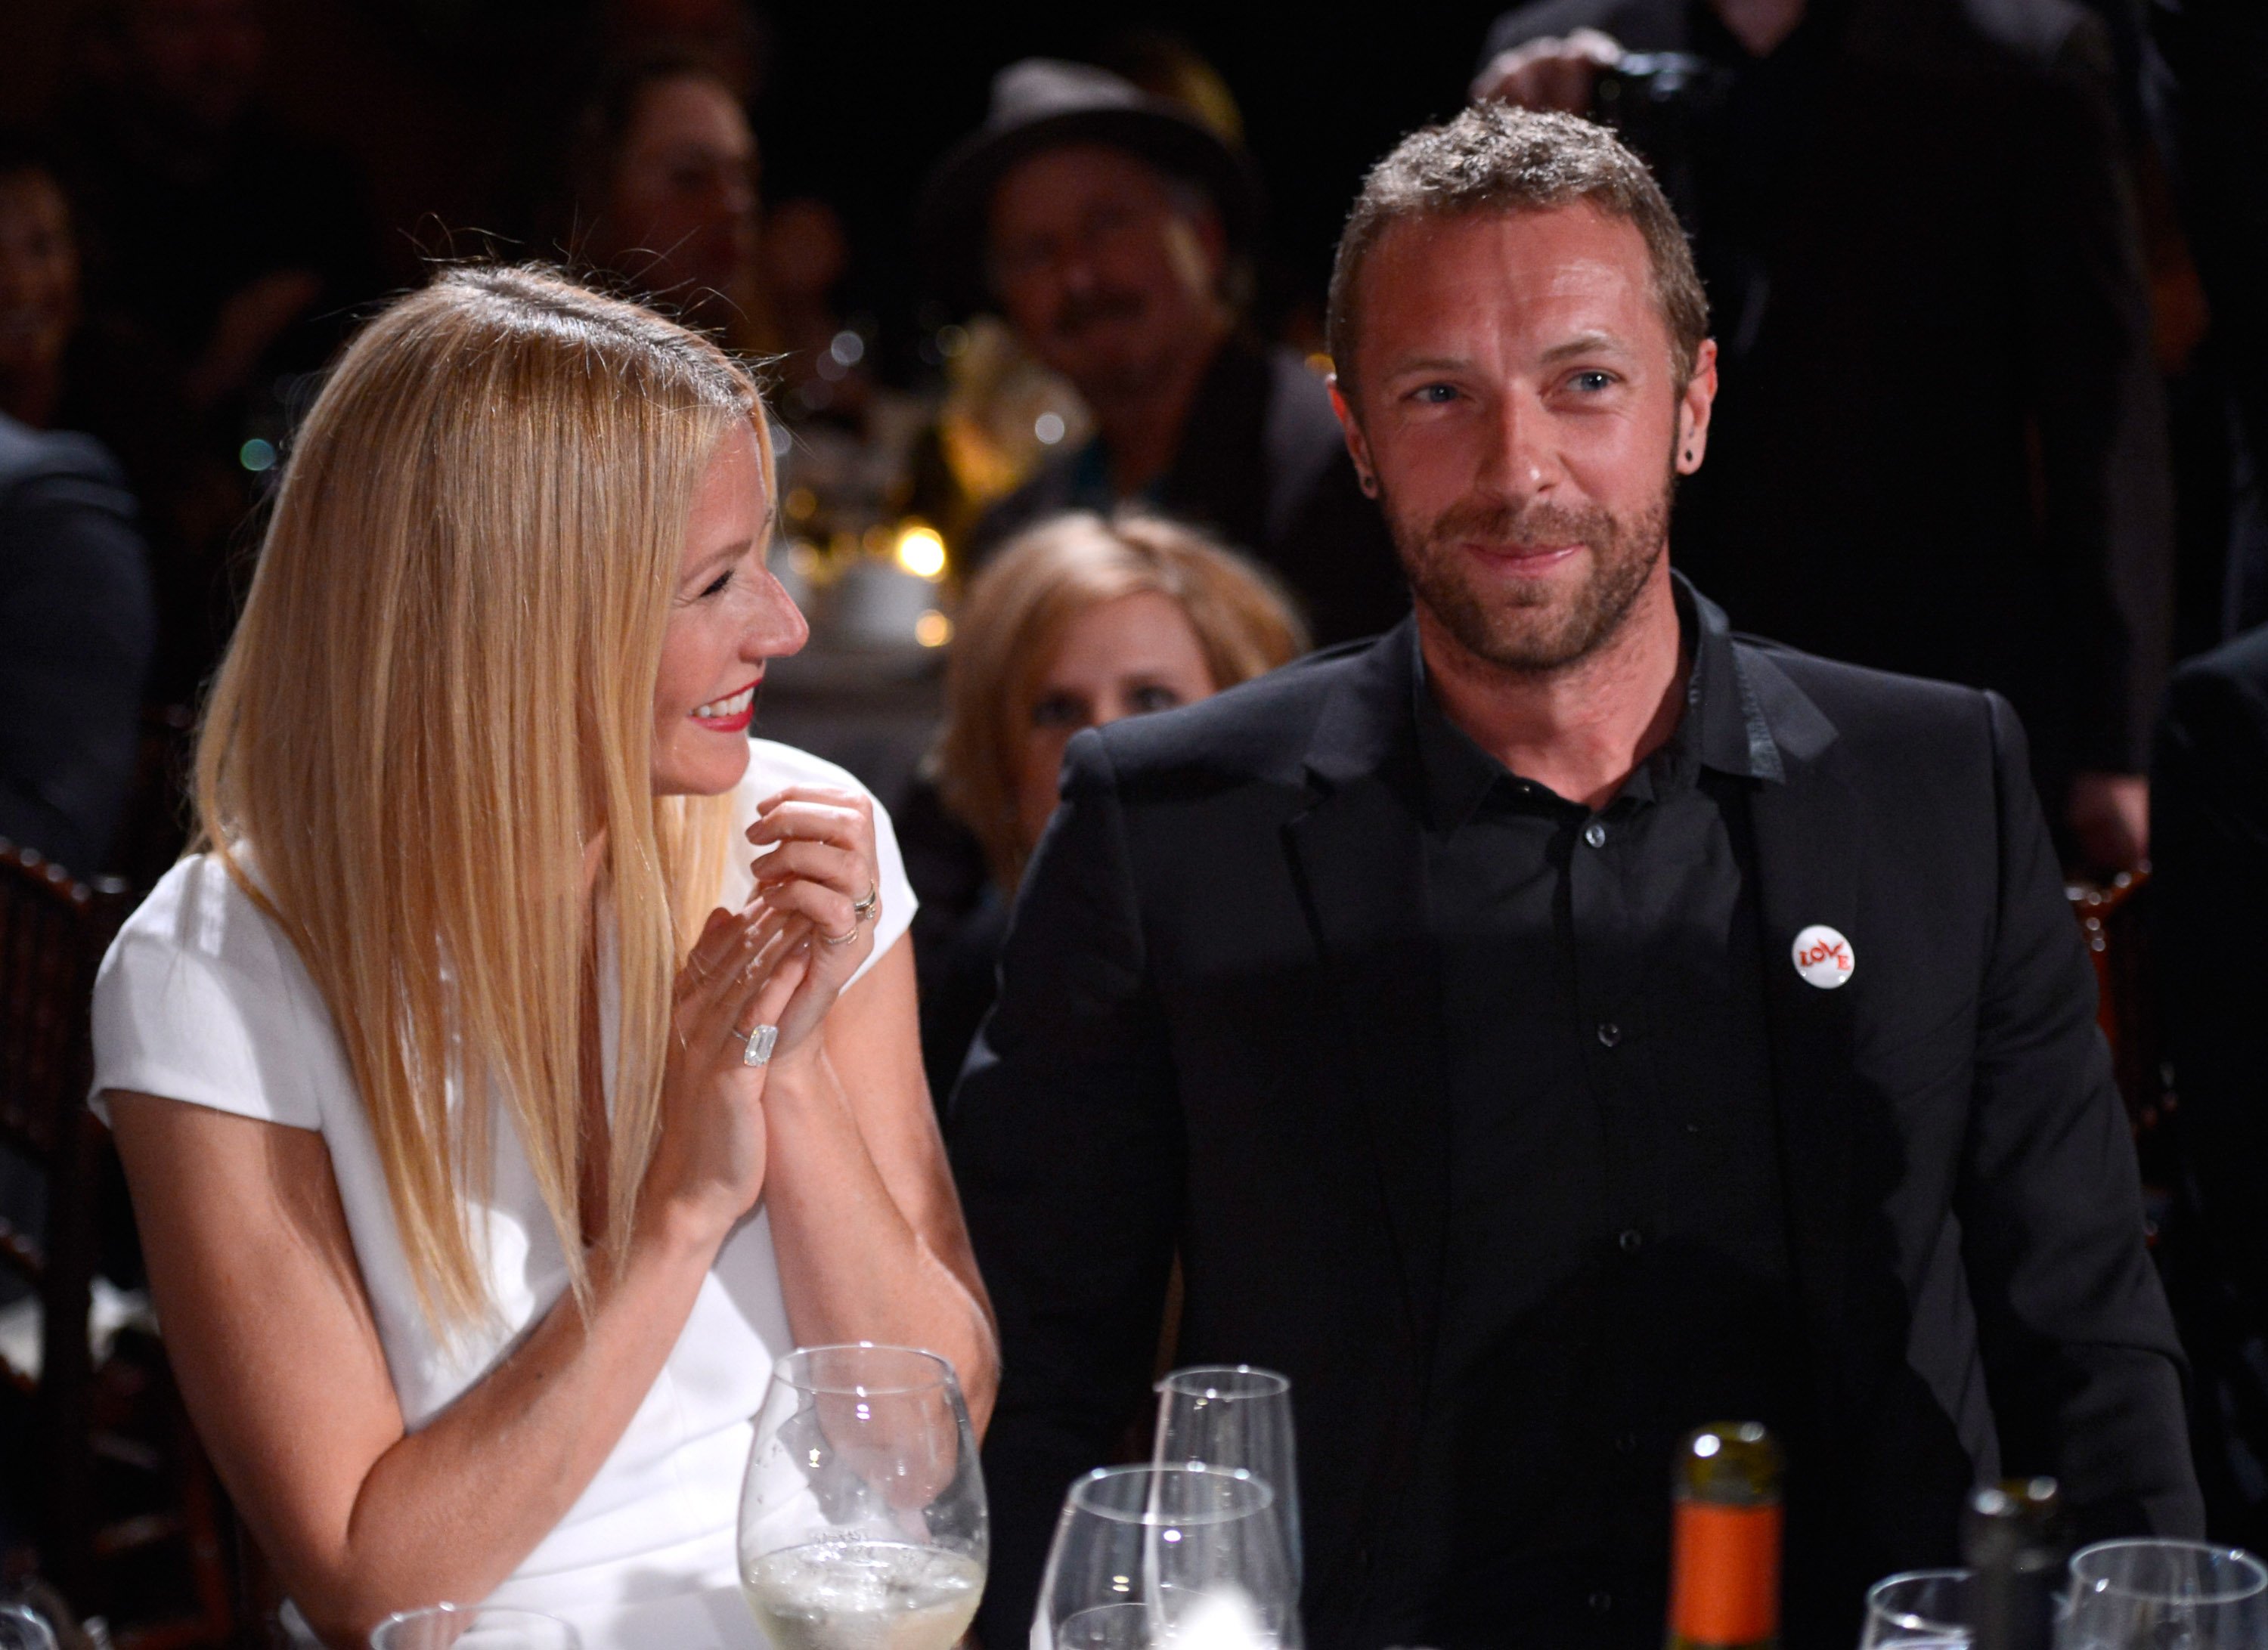 Gwyneth Paltrow and Chris Martin attend the 3rd annual Sean Penn & Friends HELP HAITI HOME Gala benefiting J/P HRO presented by Giorgio Armani at Montage Beverly Hills on January 11, 2014, in Beverly Hills, California. | Source: Getty Images.